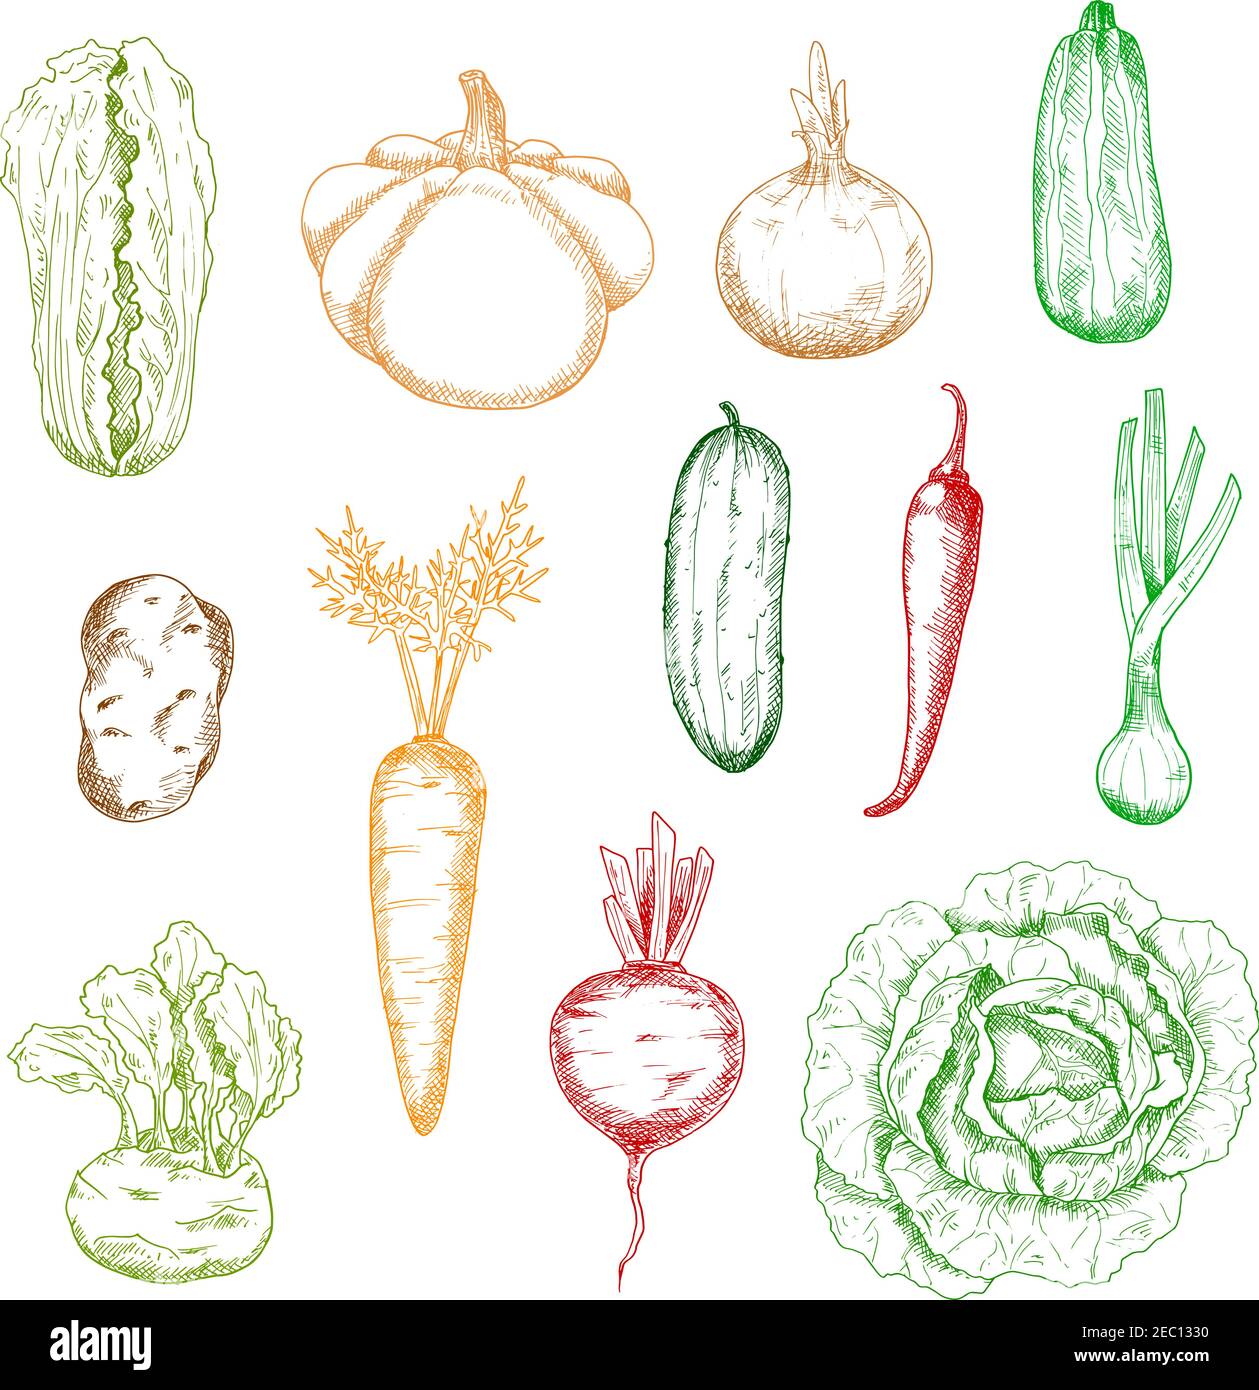 Sketches of carrot and onion, cabbages and potato, cucumber and chilli pepper, zucchini and beet, kohlrabi, scallion and pattypan squash vegetables. K Stock Vector